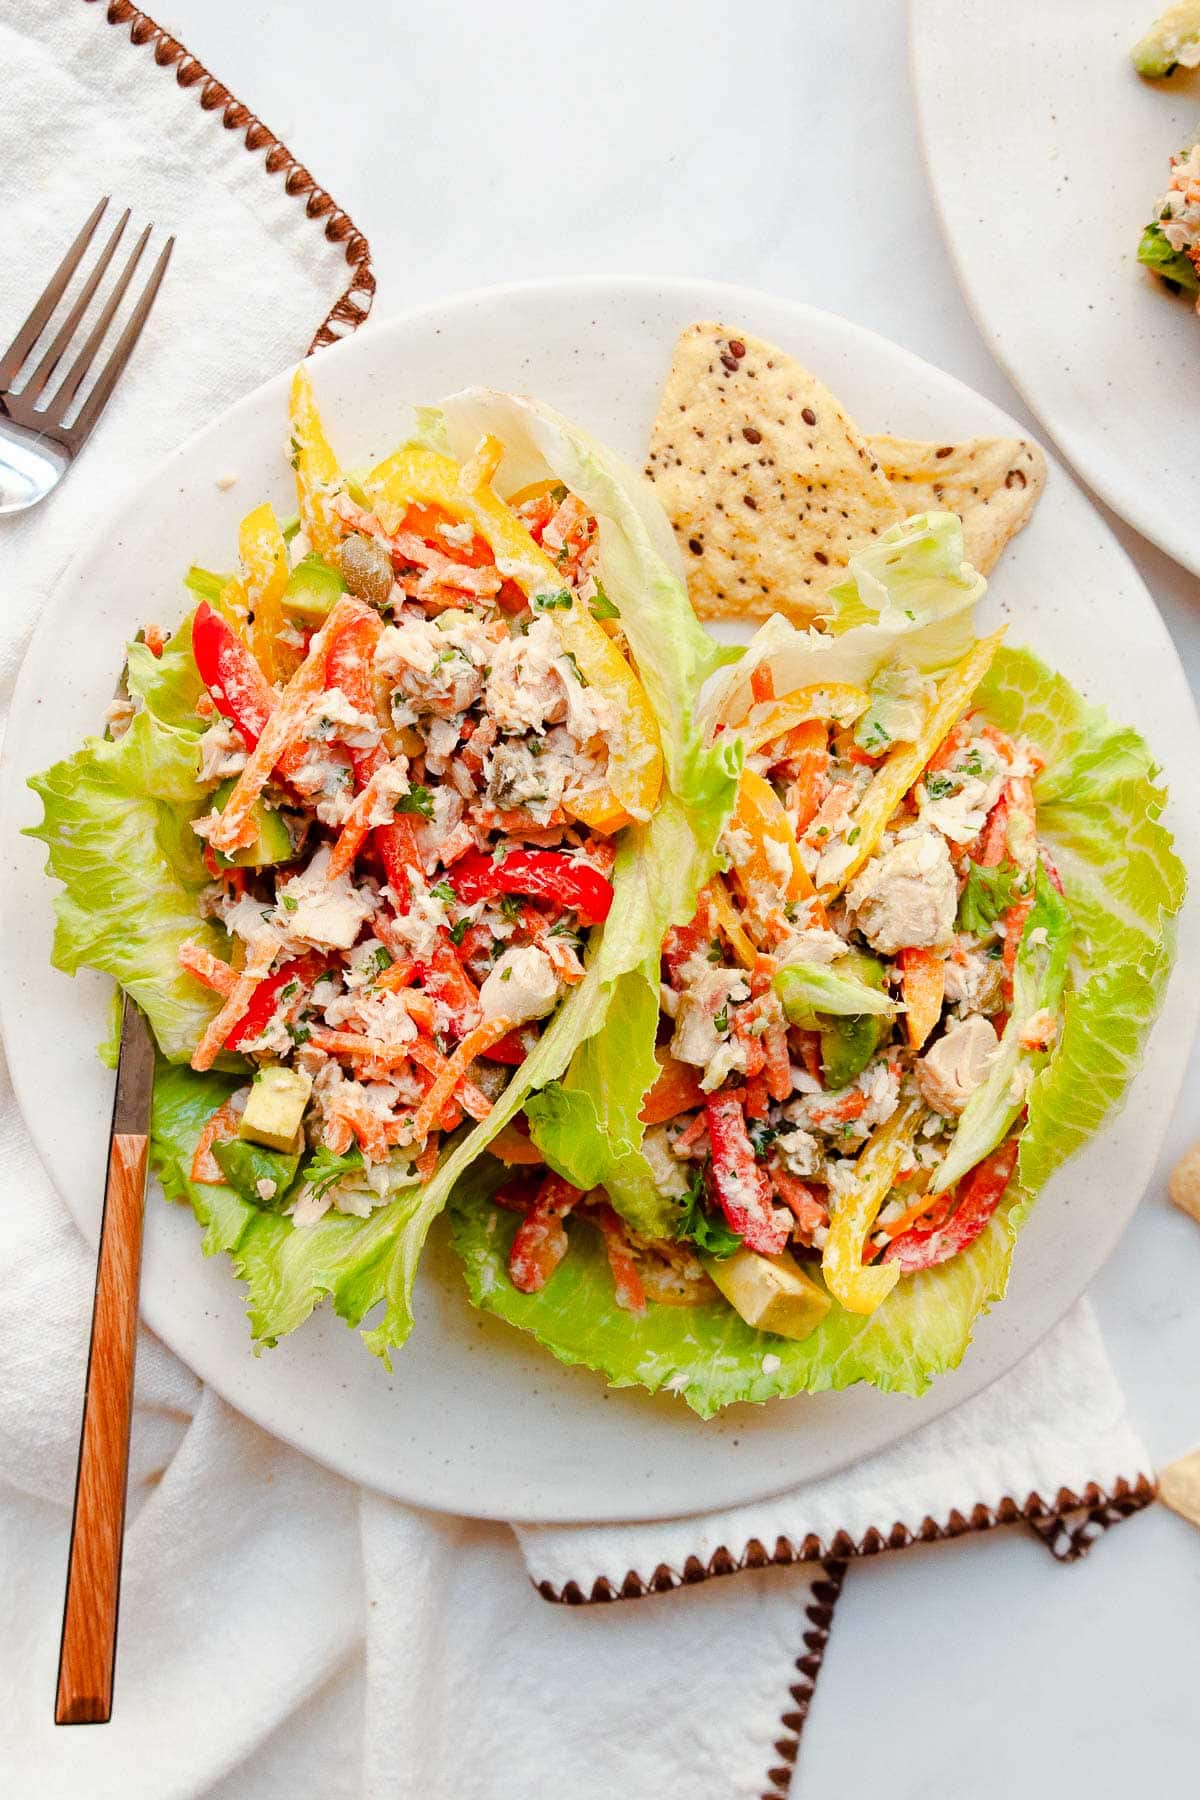 Canned salmon salad in lettuce cups on a plate with a fork, chips and napkin underneath.